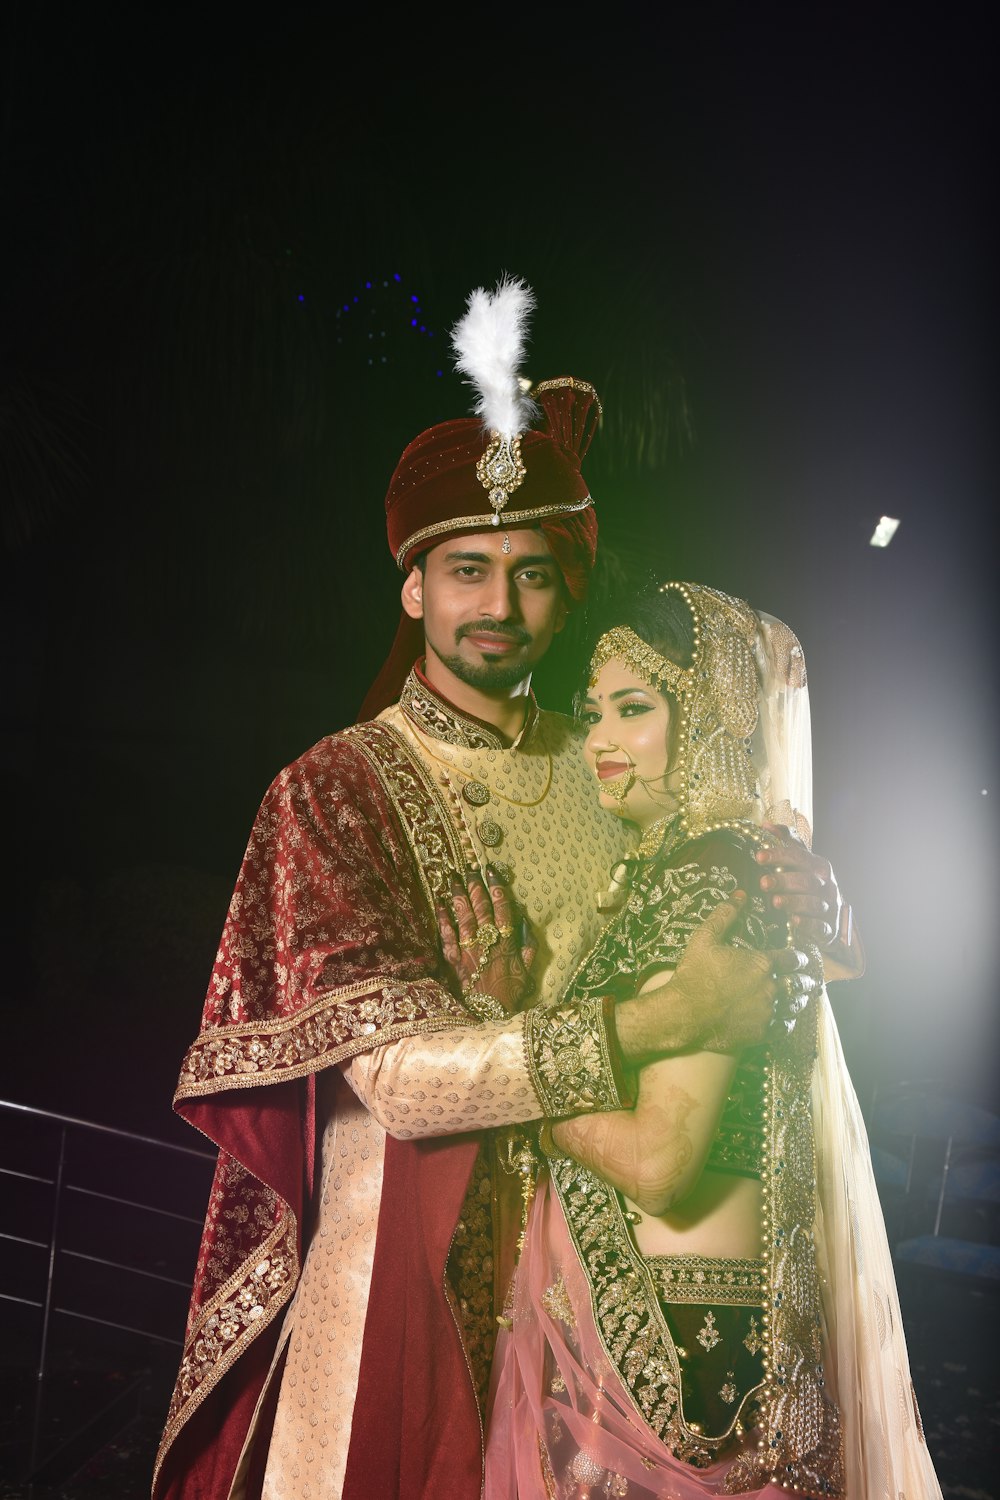 Indian Wedding Couple Pictures | Download Free Images on Unsplash